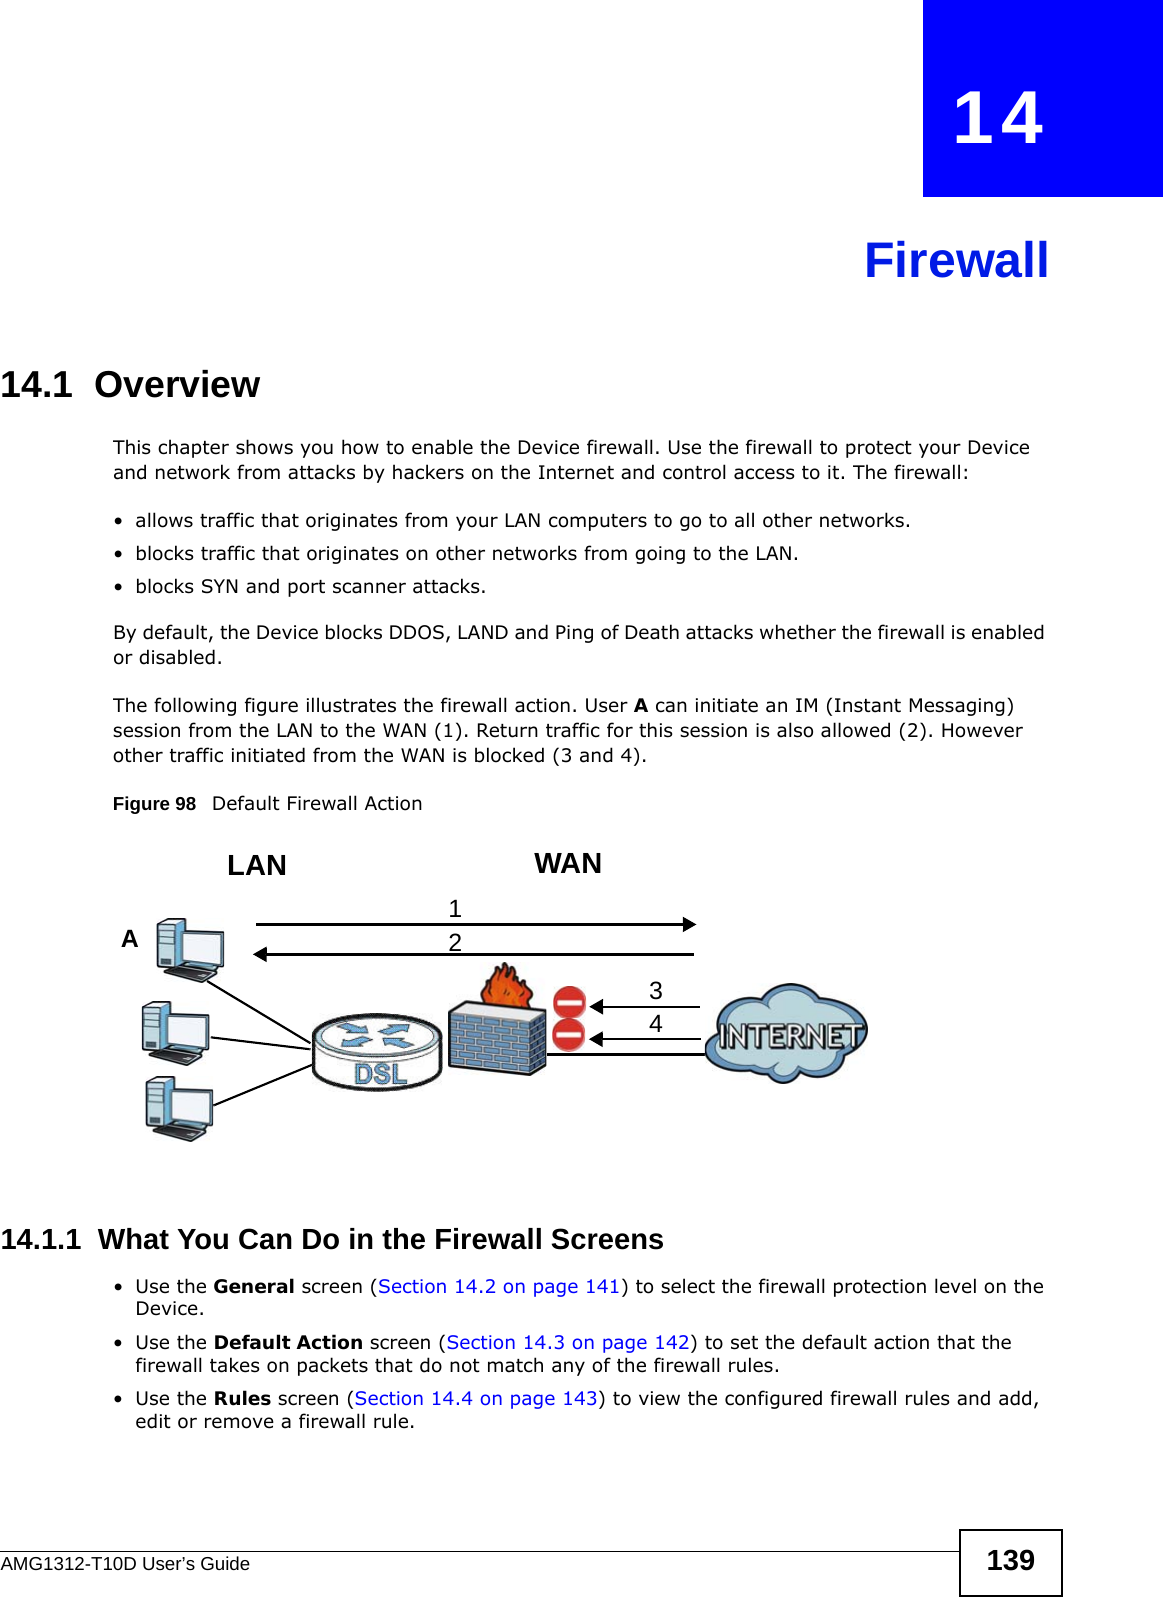 AMG1312-T10D User’s Guide 139CHAPTER   14Firewall14.1  OverviewThis chapter shows you how to enable the Device firewall. Use the firewall to protect your Device and network from attacks by hackers on the Internet and control access to it. The firewall:• allows traffic that originates from your LAN computers to go to all other networks. • blocks traffic that originates on other networks from going to the LAN.• blocks SYN and port scanner attacks.By default, the Device blocks DDOS, LAND and Ping of Death attacks whether the firewall is enabled or disabled.The following figure illustrates the firewall action. User A can initiate an IM (Instant Messaging) session from the LAN to the WAN (1). Return traffic for this session is also allowed (2). However other traffic initiated from the WAN is blocked (3 and 4).Figure 98   Default Firewall Action14.1.1  What You Can Do in the Firewall Screens•Use the General screen (Section 14.2 on page 141) to select the firewall protection level on the Device.•Use the Default Action screen (Section 14.3 on page 142) to set the default action that the firewall takes on packets that do not match any of the firewall rules.•Use the Rules screen (Section 14.4 on page 143) to view the configured firewall rules and add, edit or remove a firewall rule.WANLAN3412A